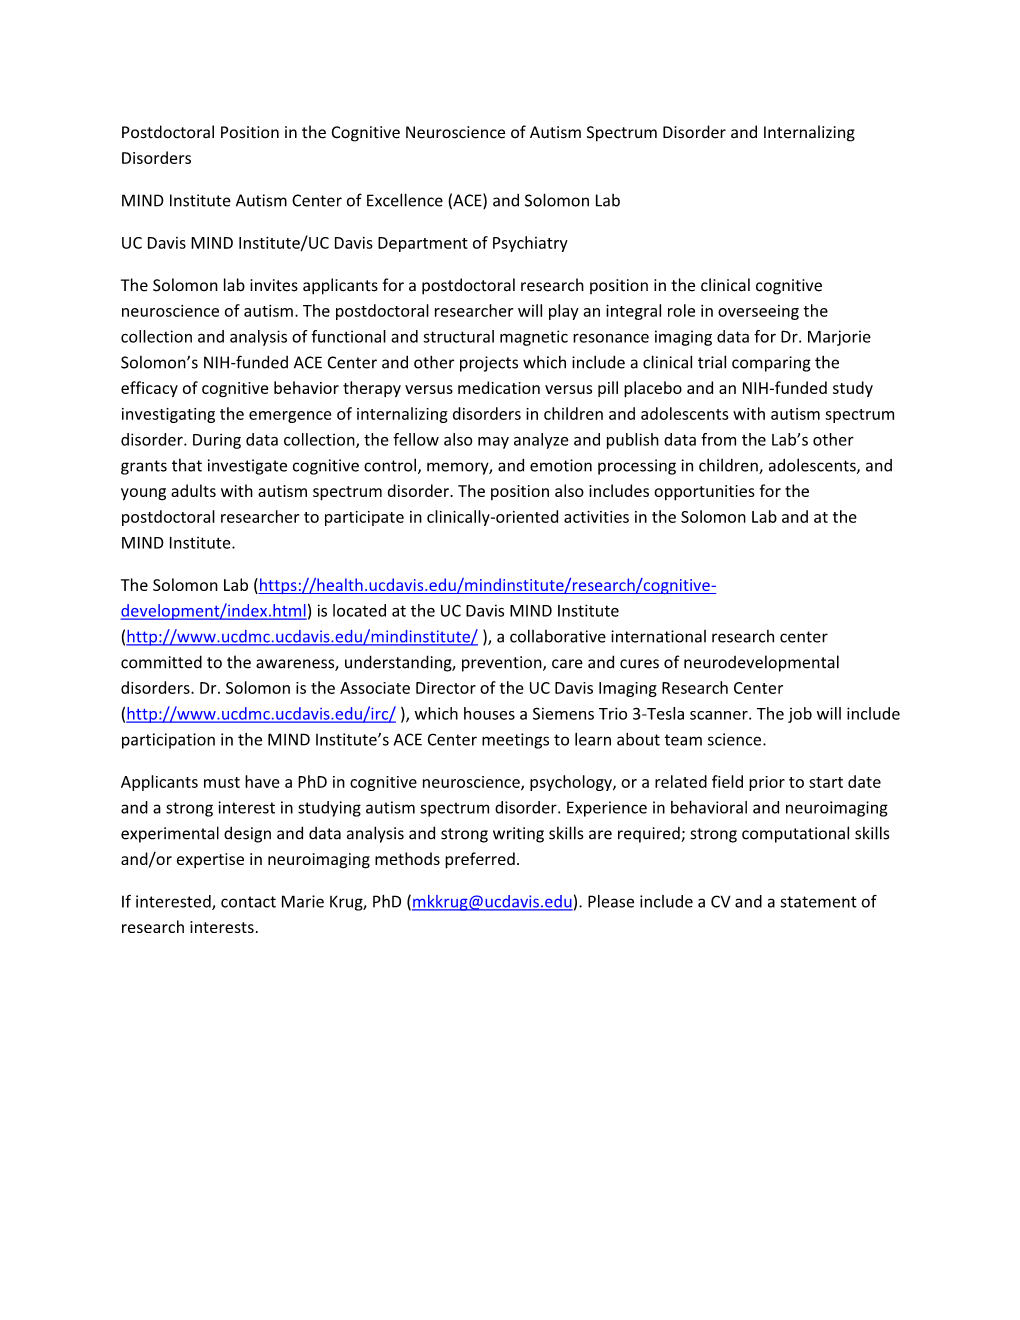 Postdoctoral Position in the Cognitive Neuroscience of Autism Spectrum Disorder and Internalizing Disorders